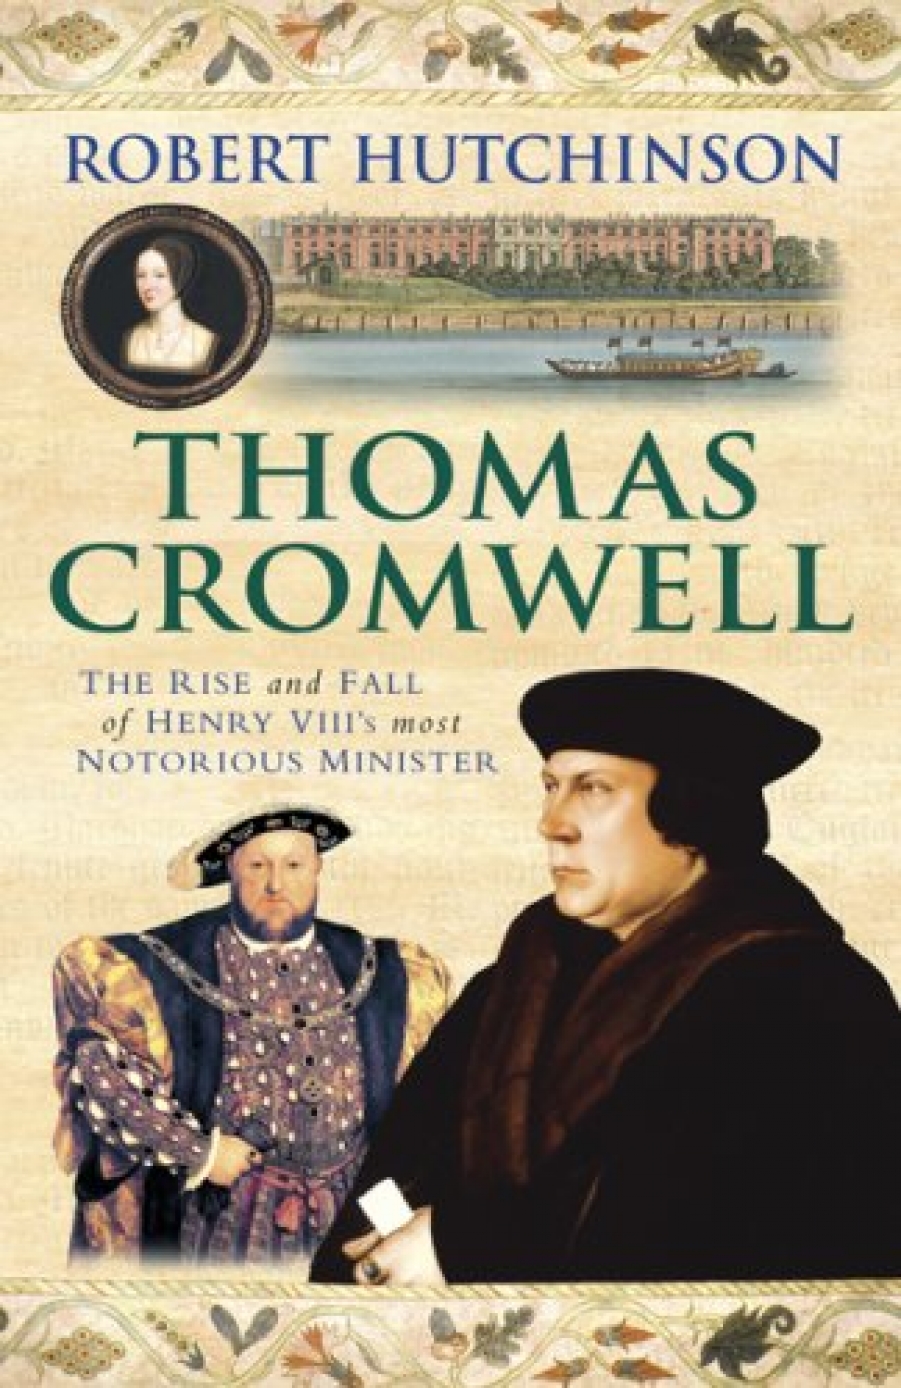 Hutchinson, Robert Thomas Cromwell: The Rise and Fall of Henry VIII's Most Notorious Minister 